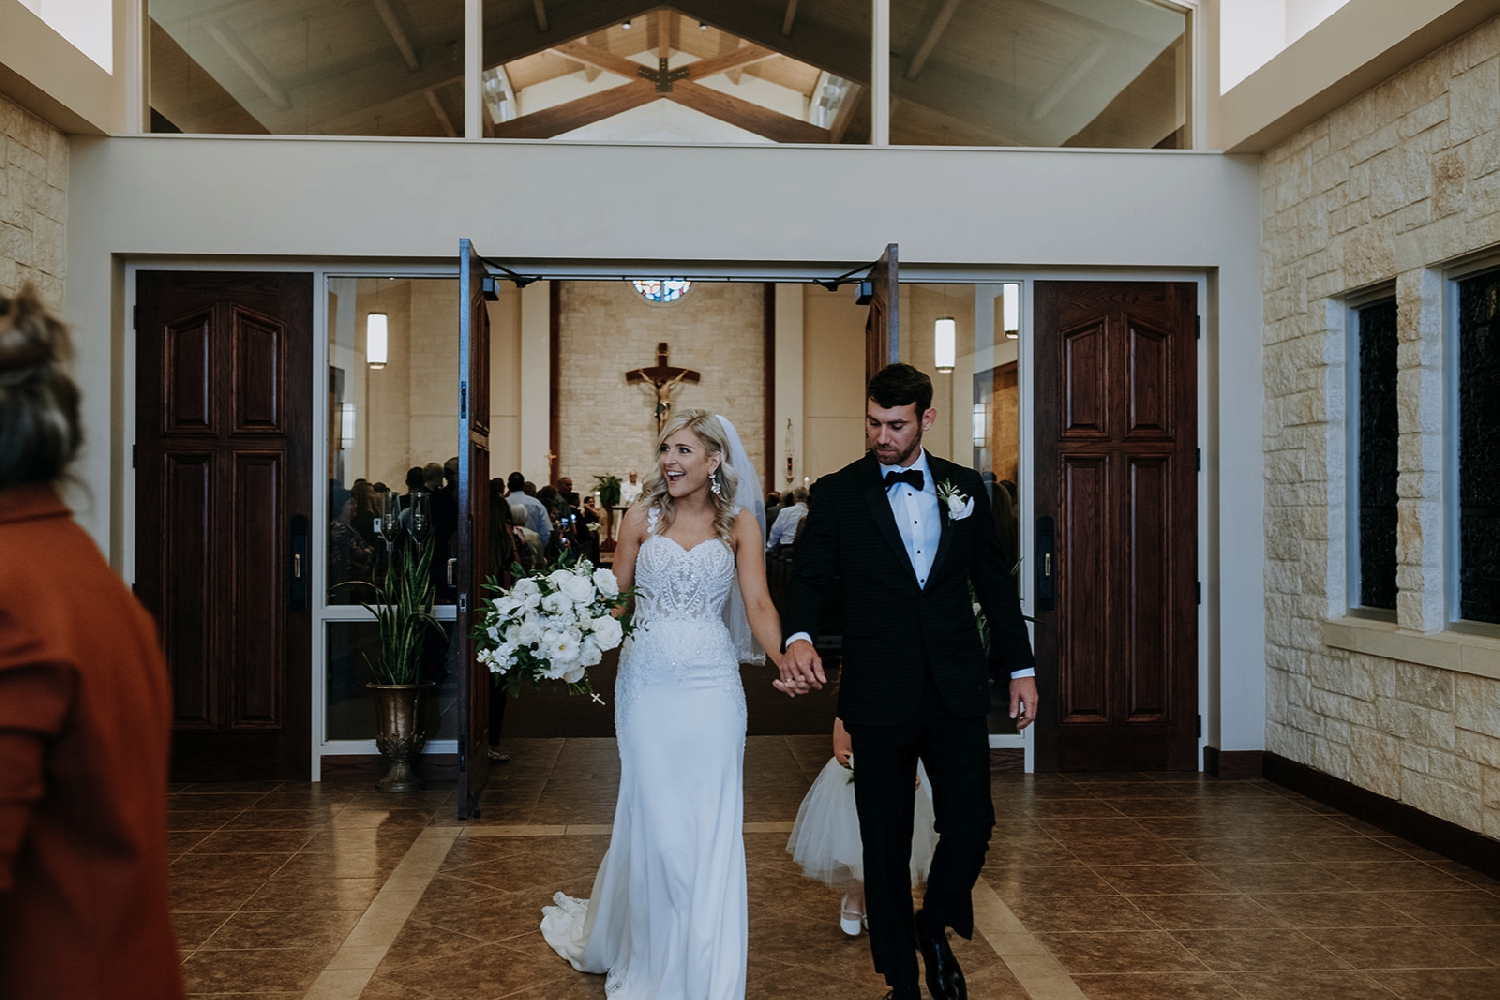 Classic Black and White Wedding Inspiration | Church Hall Transformation for Wedding in San Antonio, Texas | Central Texas Floral Designer | Reiley and Rose